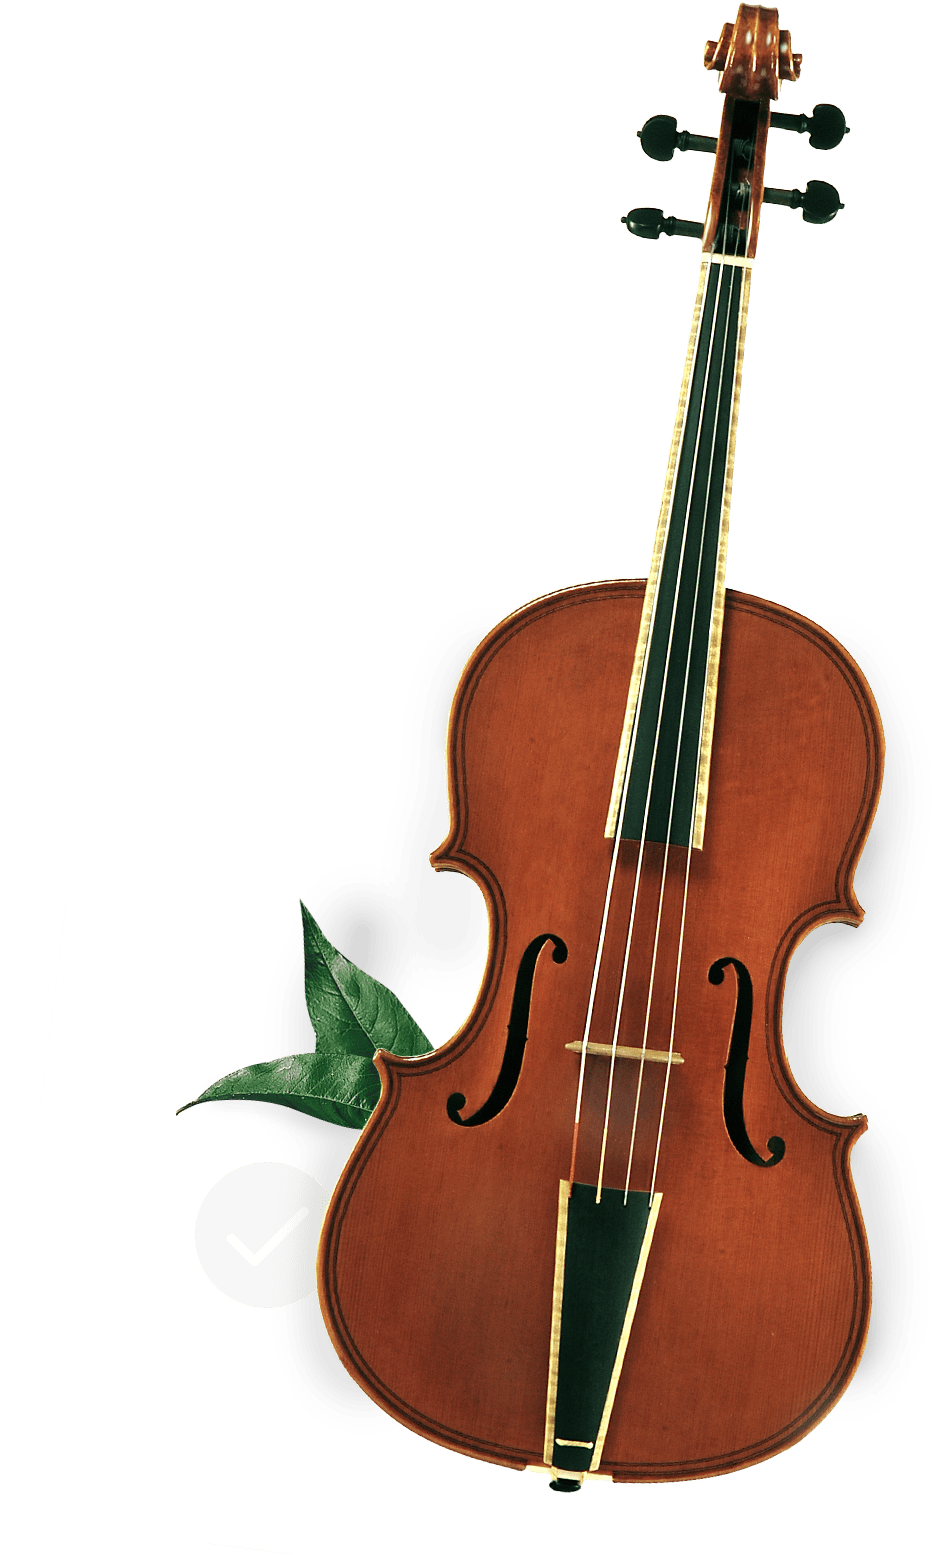 Classic Violinwith Green Leaves